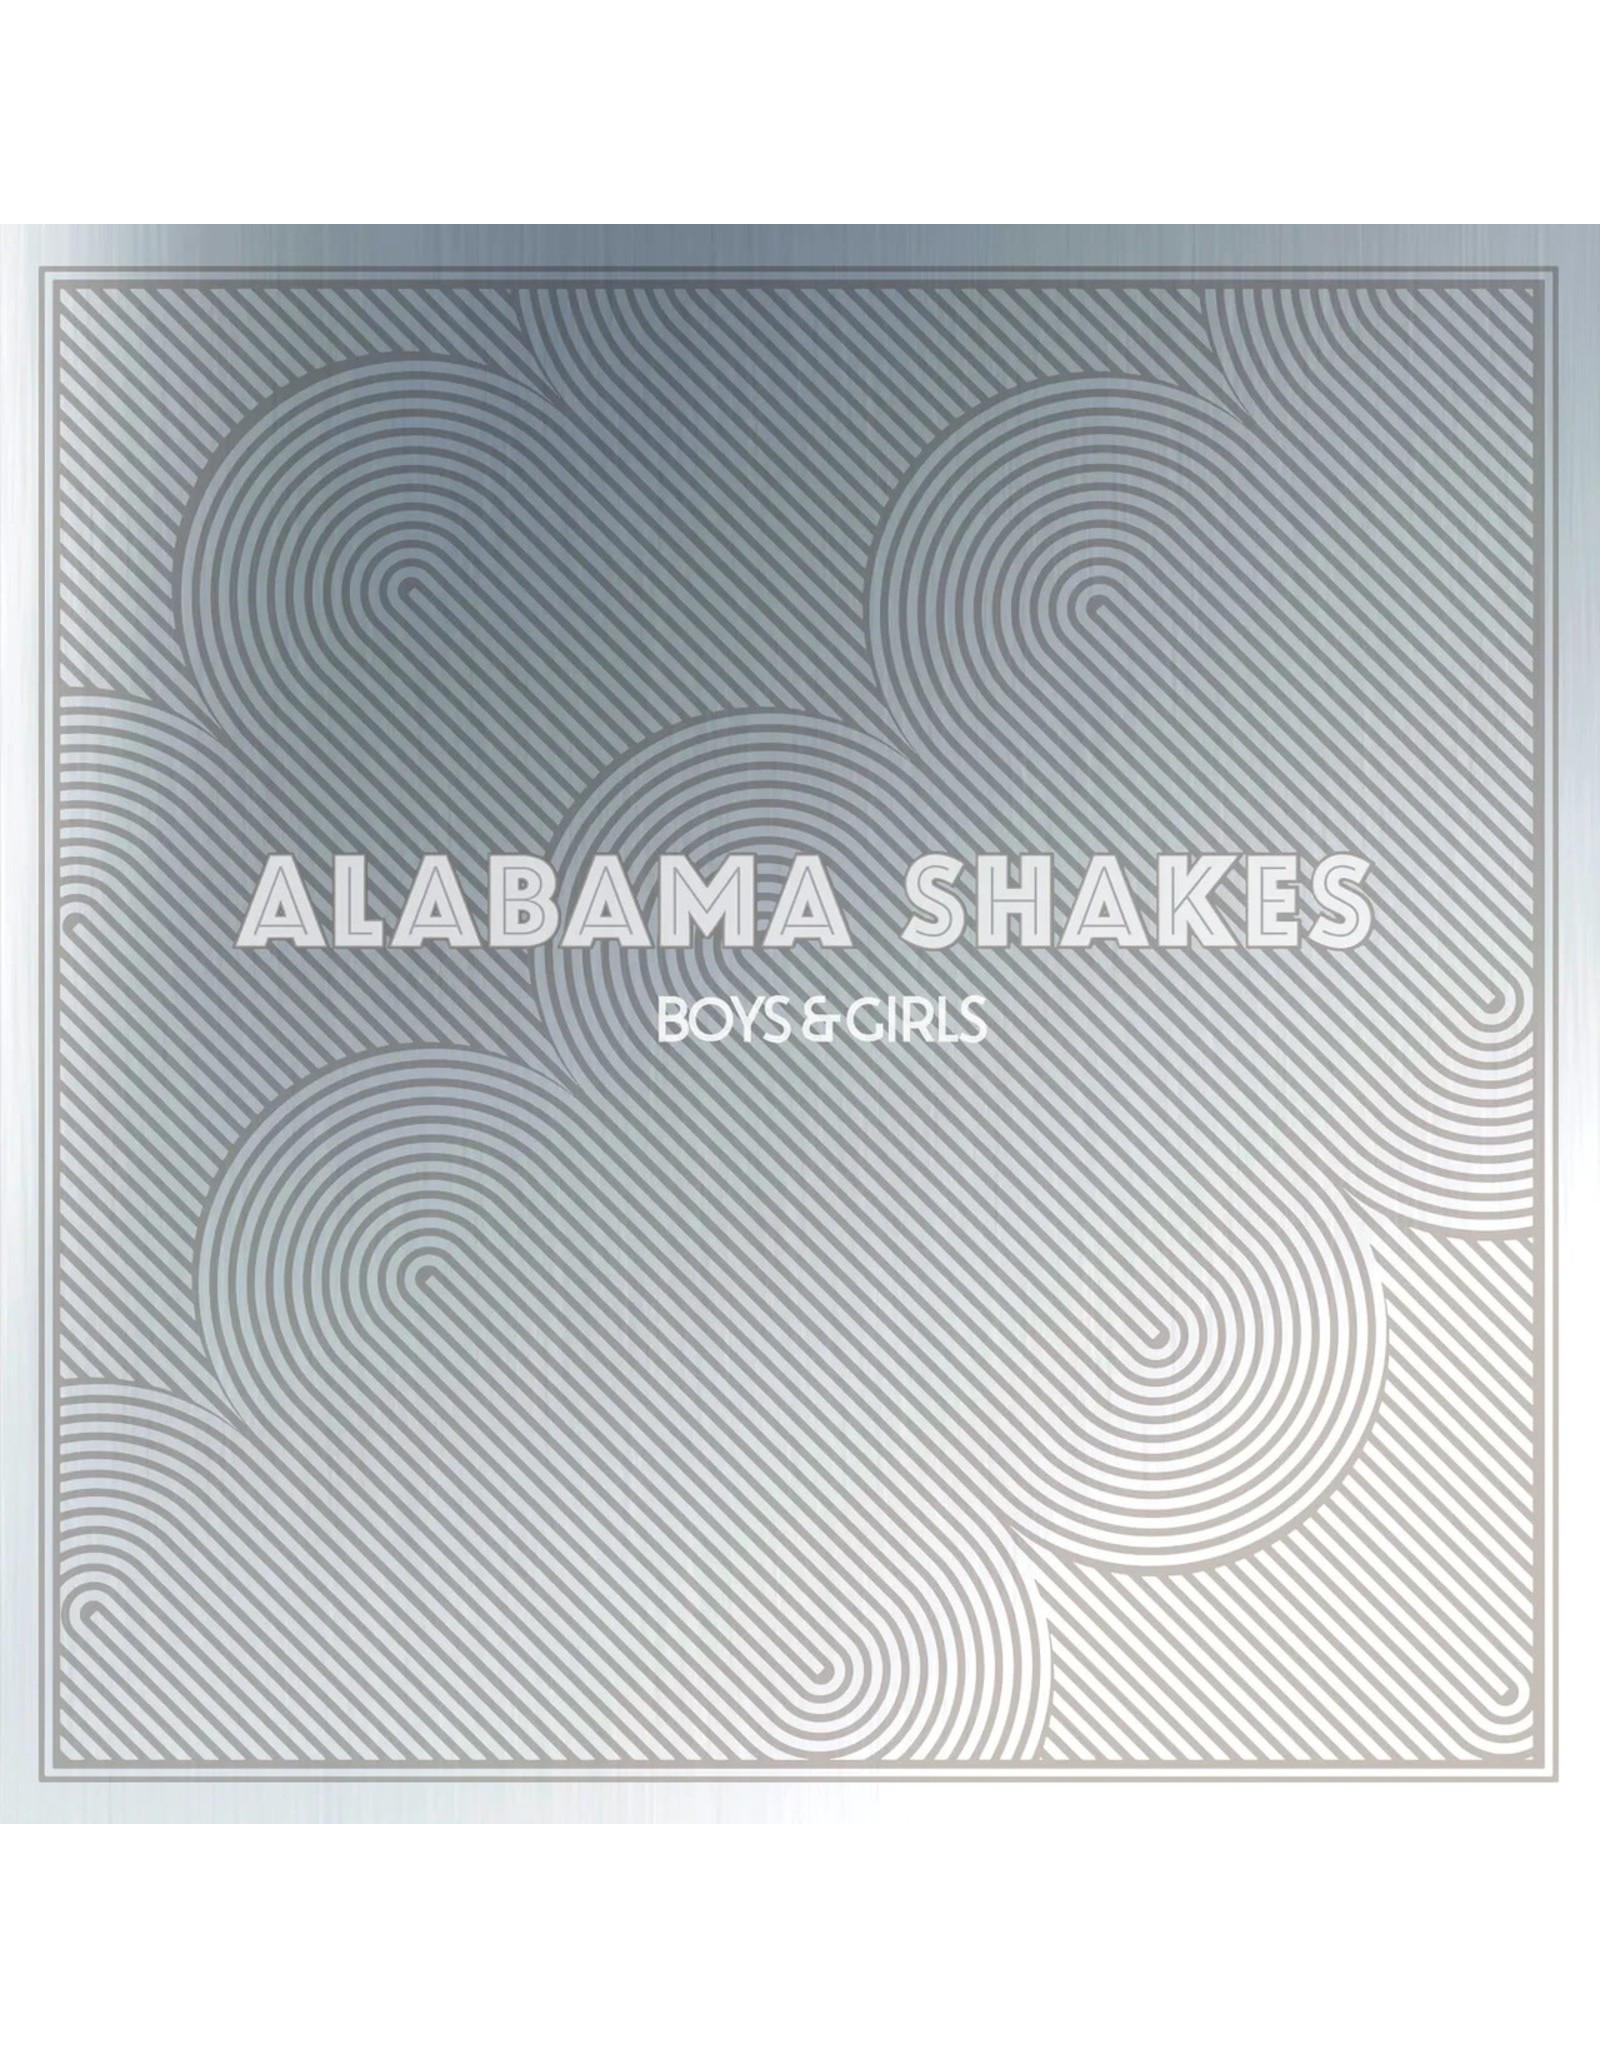 Alabama Shakes - Boys & Girls (10th Anniversary) [Deluxe Edition]